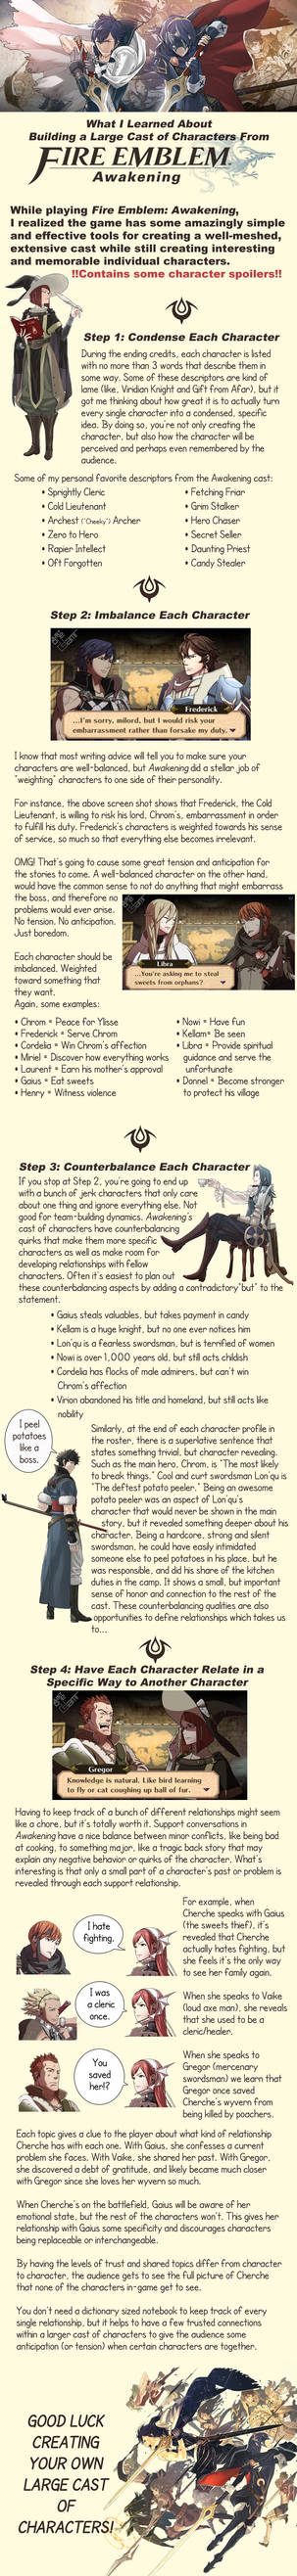 Tips for Large Cast of Characters